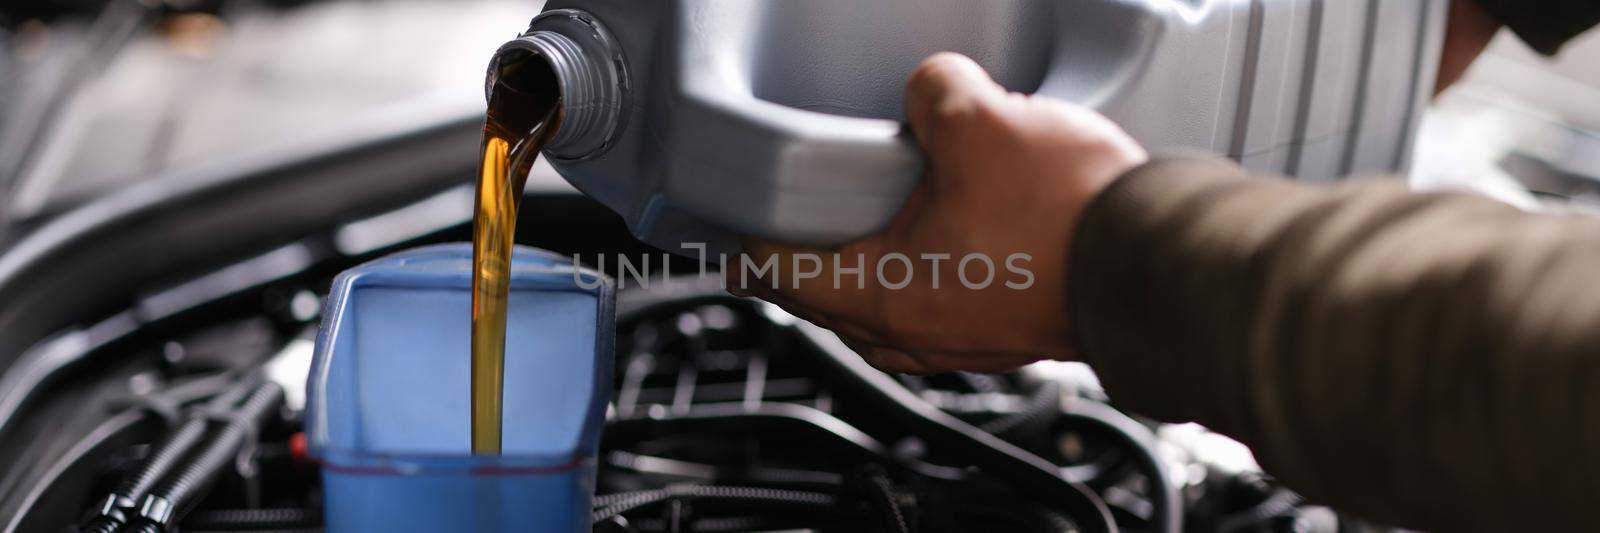 Locksmith mechanic pours engine oil into plastic container on motor engine. Oil change in car engine concept